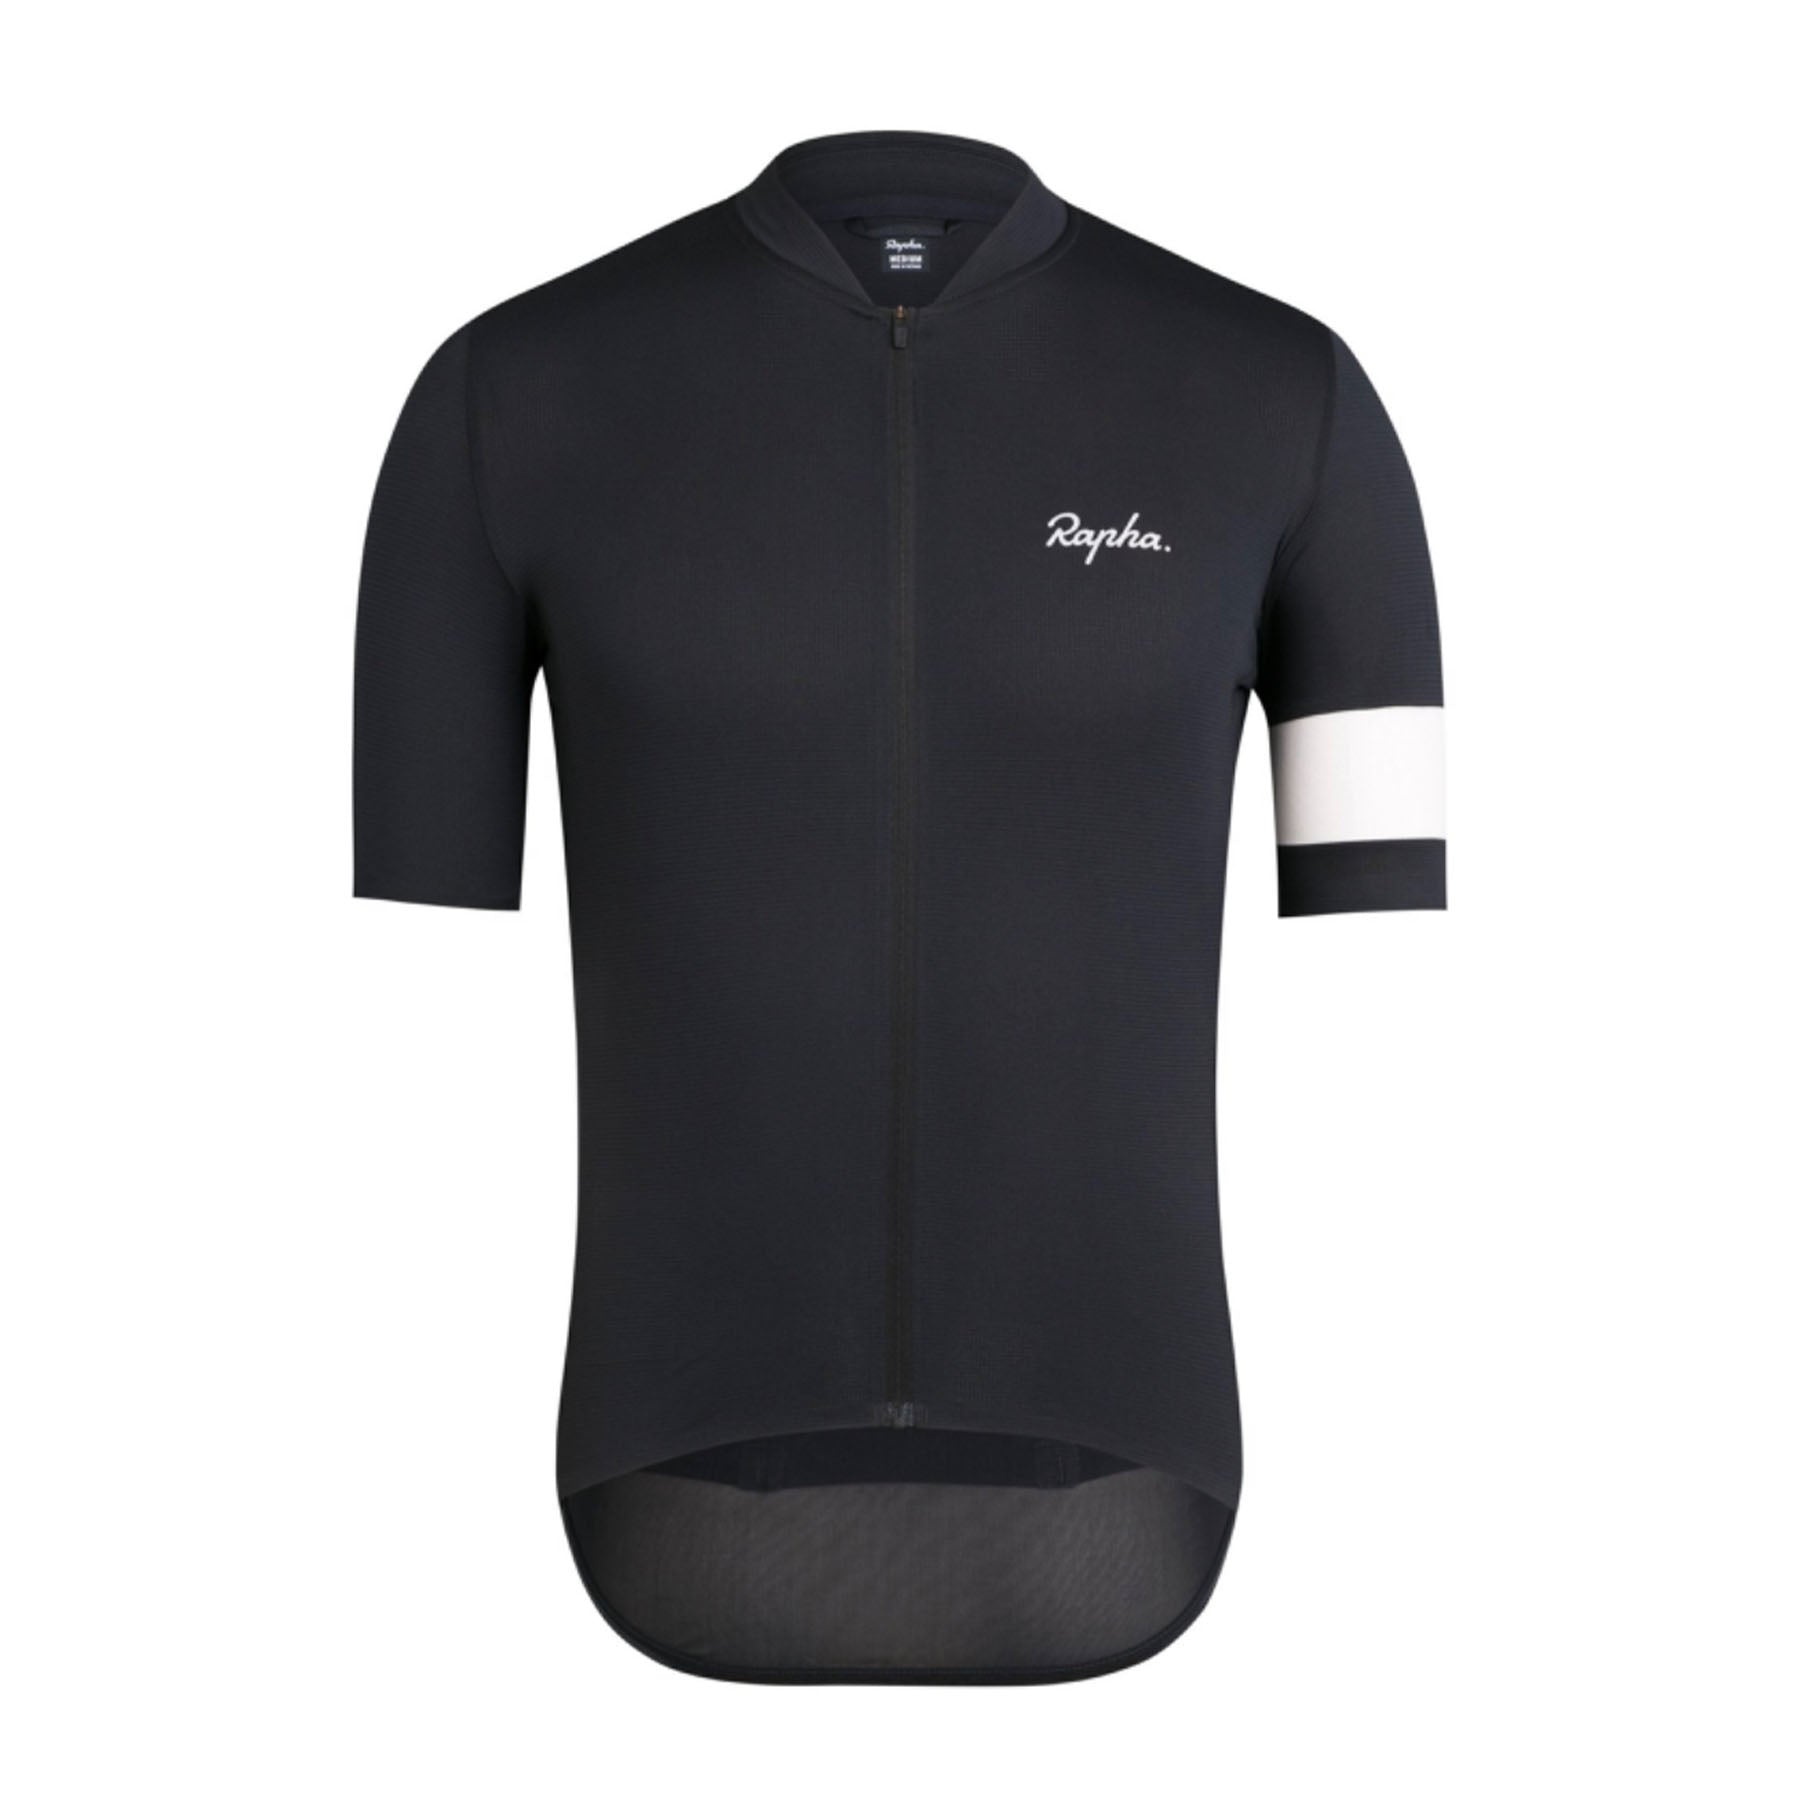 Hero image featuring the front of the Rapha Men's Classic Flyweight jersey in black, with a white "rapha" logo on the left chest and a white armband on the left arm